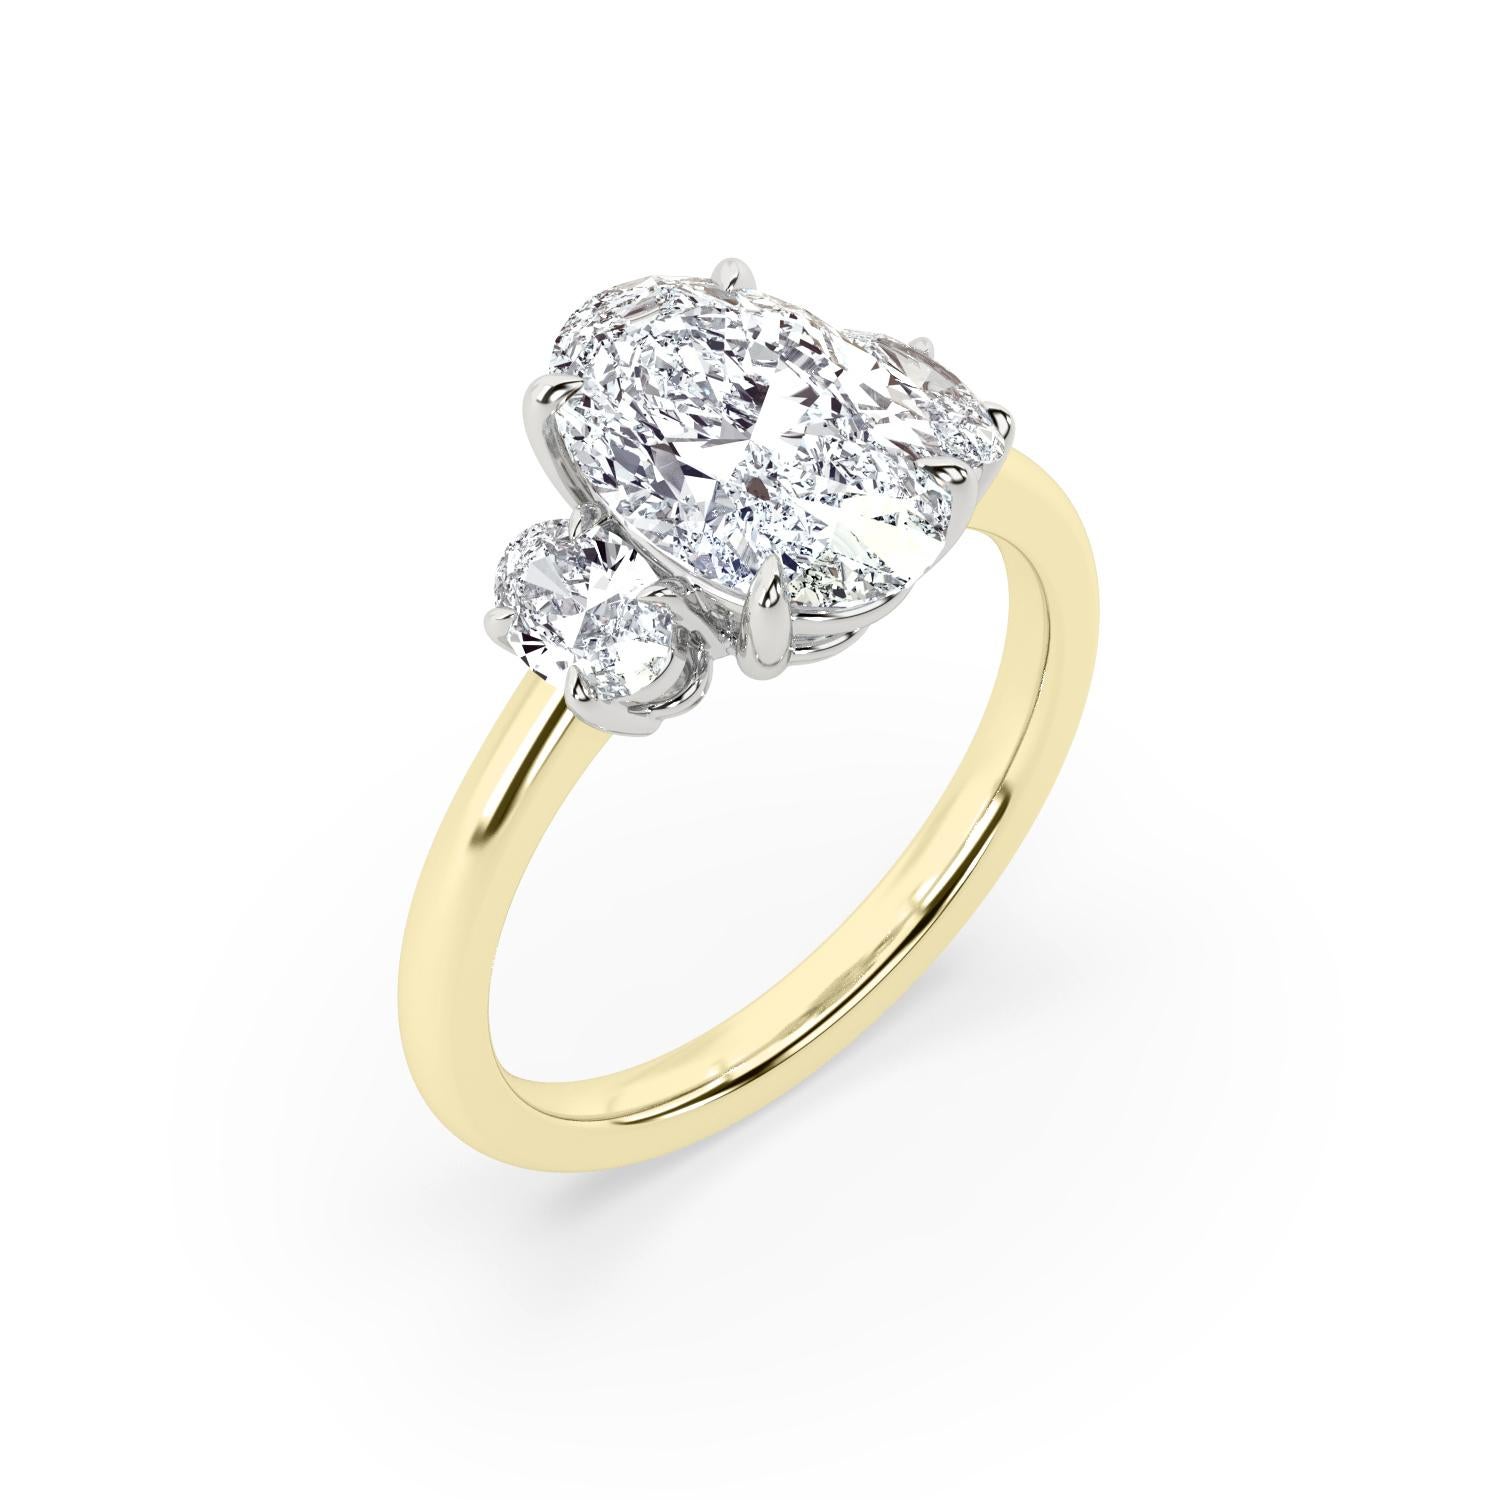 2 carat GIA certified oval brilliant diamond engagement ring. Diamond has G color and VS2 clarity. The center diamond is flanked by two smaller ovals (4x3mm) in matching quality. Setting is handcrafted in a delicate 14k yellow gold setting with